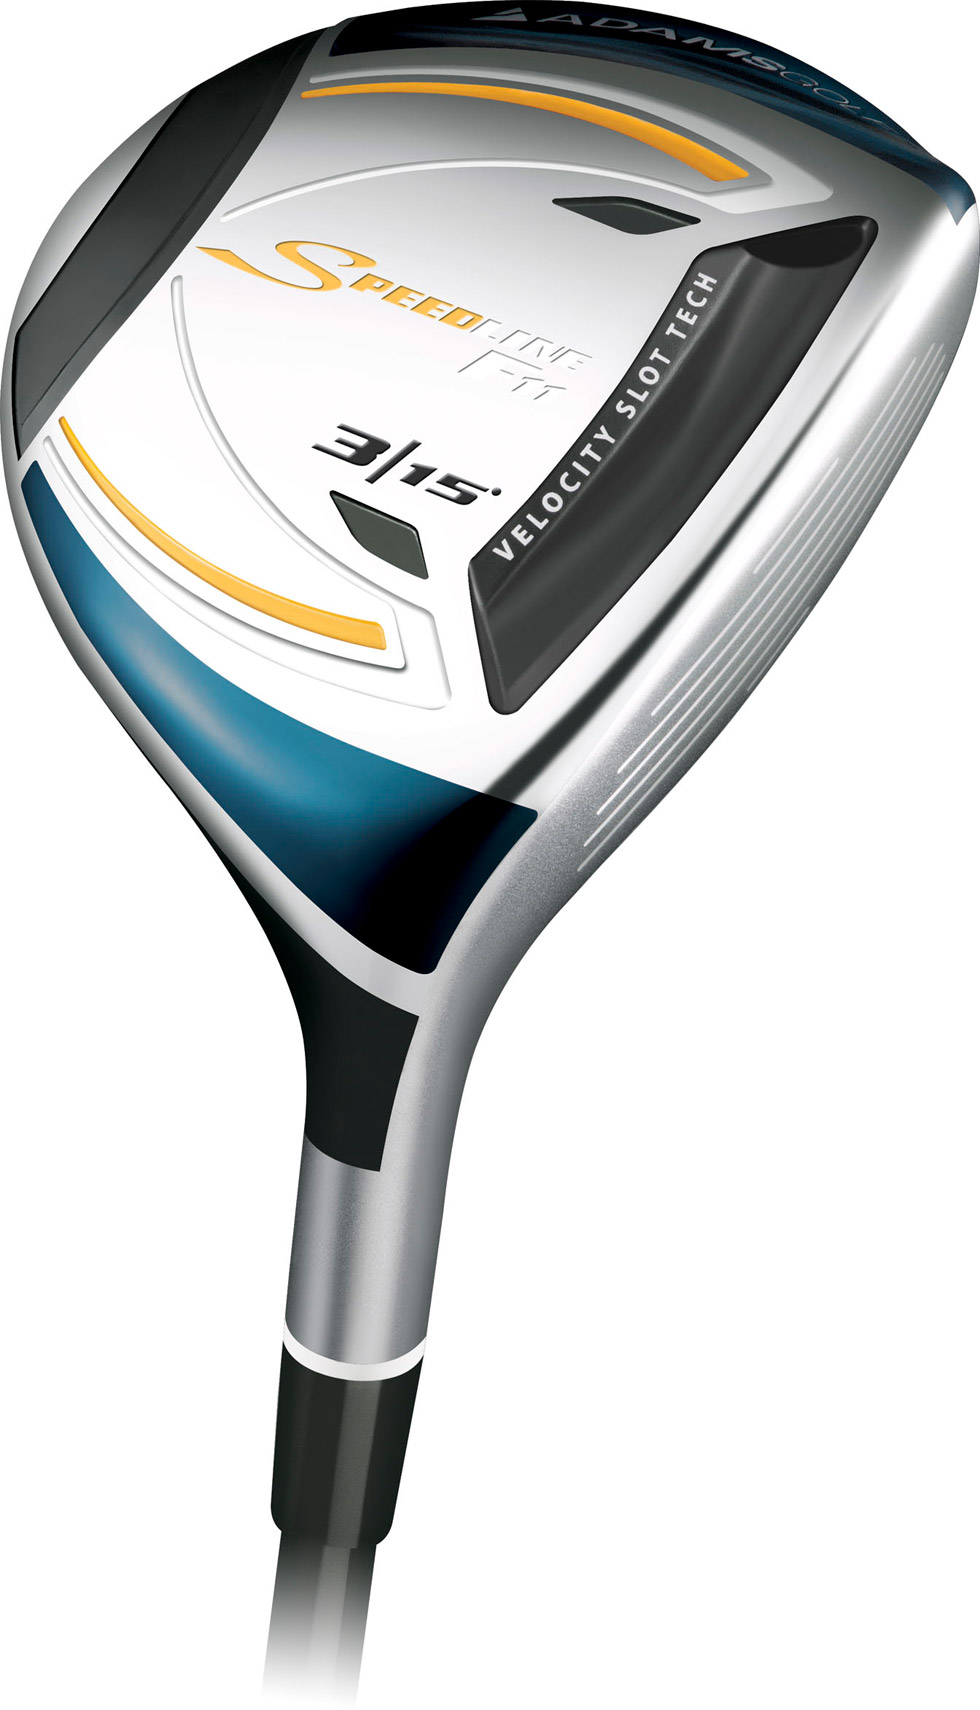 Adams Introduces Speedline F11 Drivers and Fairway Woods (Bag Drop) - The Sand Trap